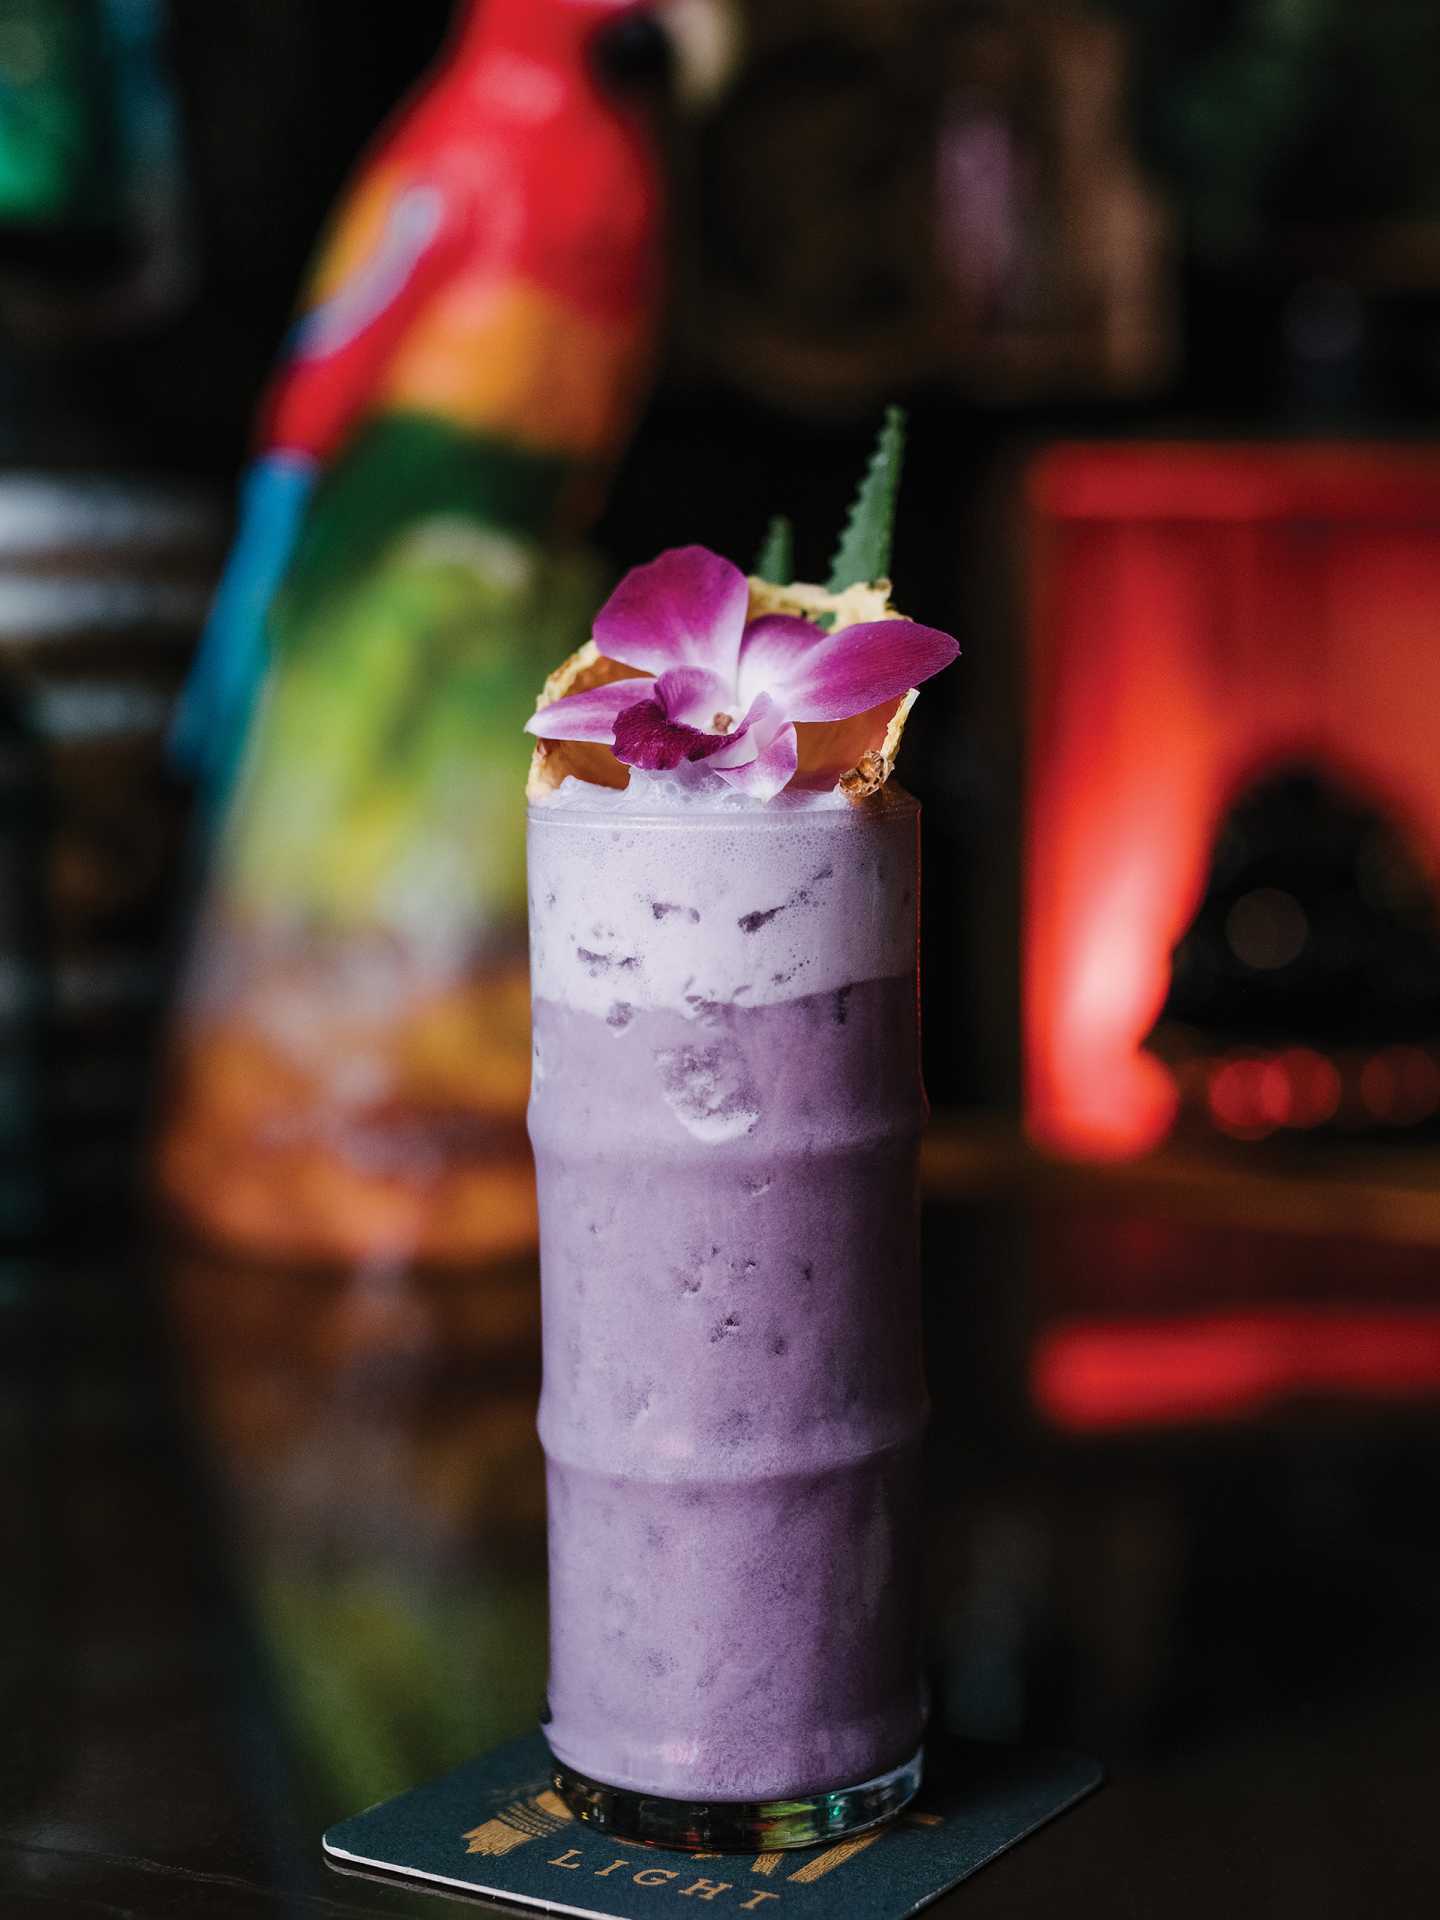 Tropical cocktail recipes from Port Light on Bloor | The Scube Ube Doo cocktail